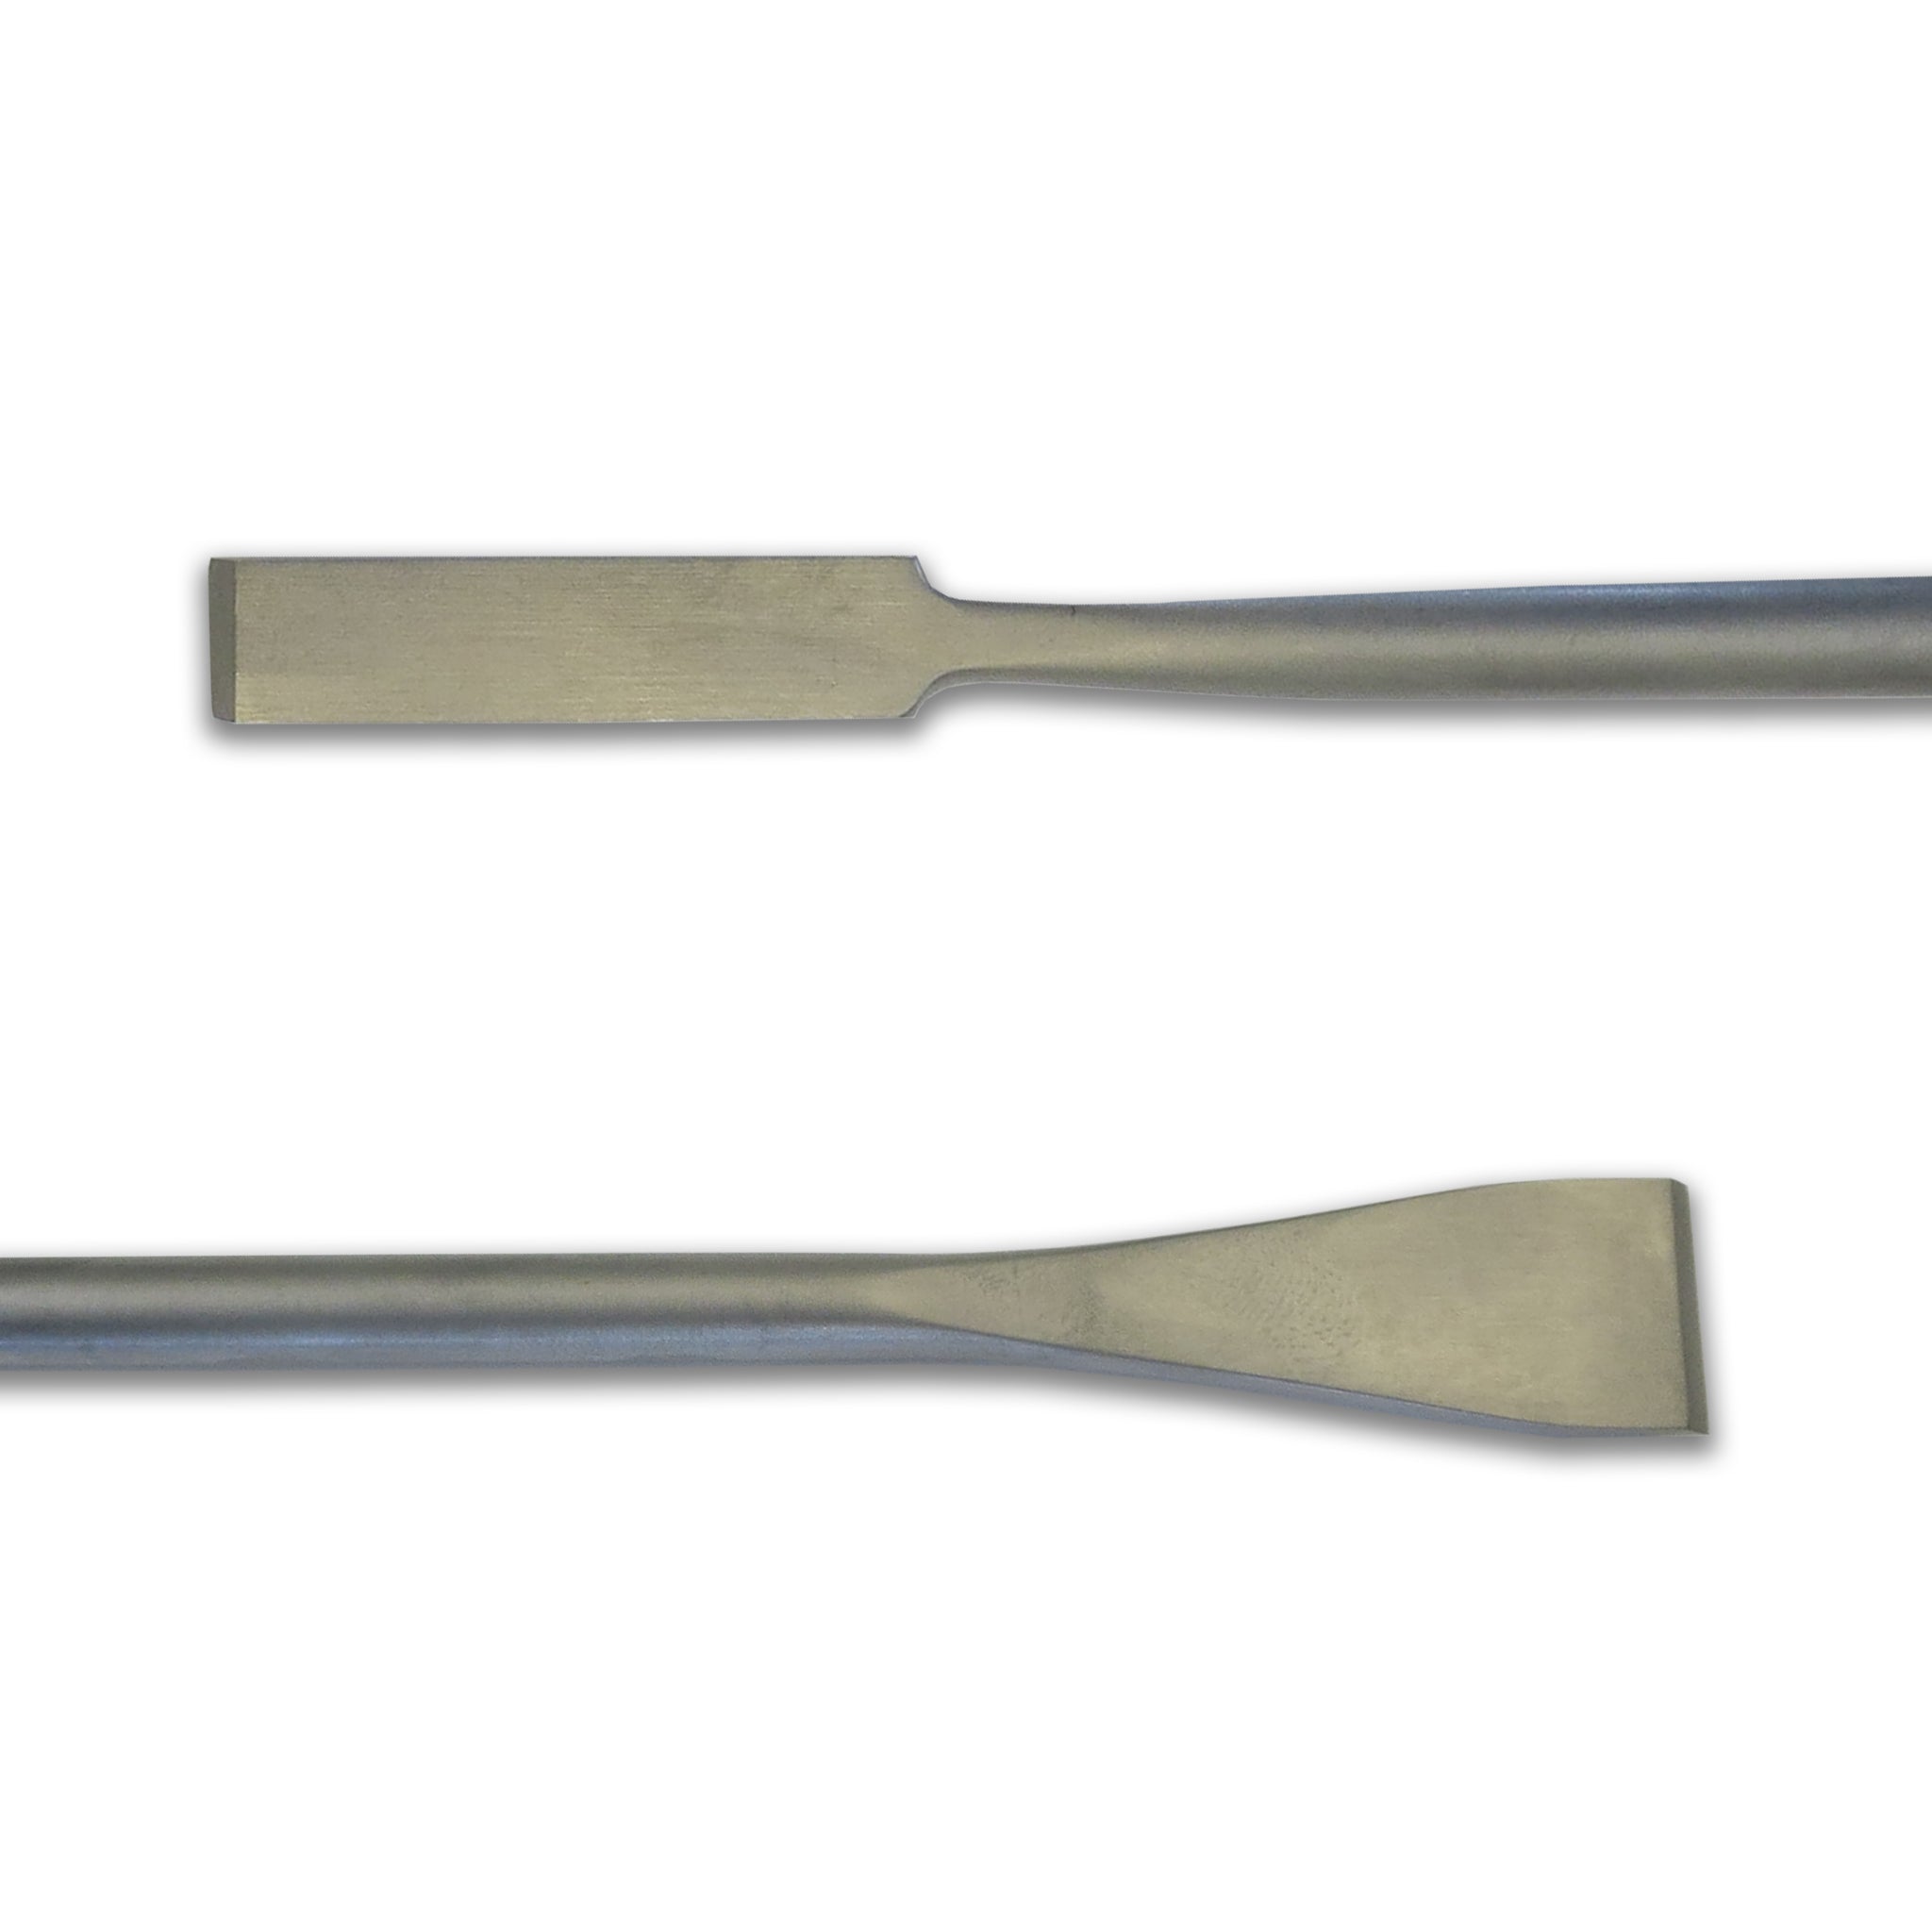 Clean Up & Lace Stainless Steel Tool EIC1412